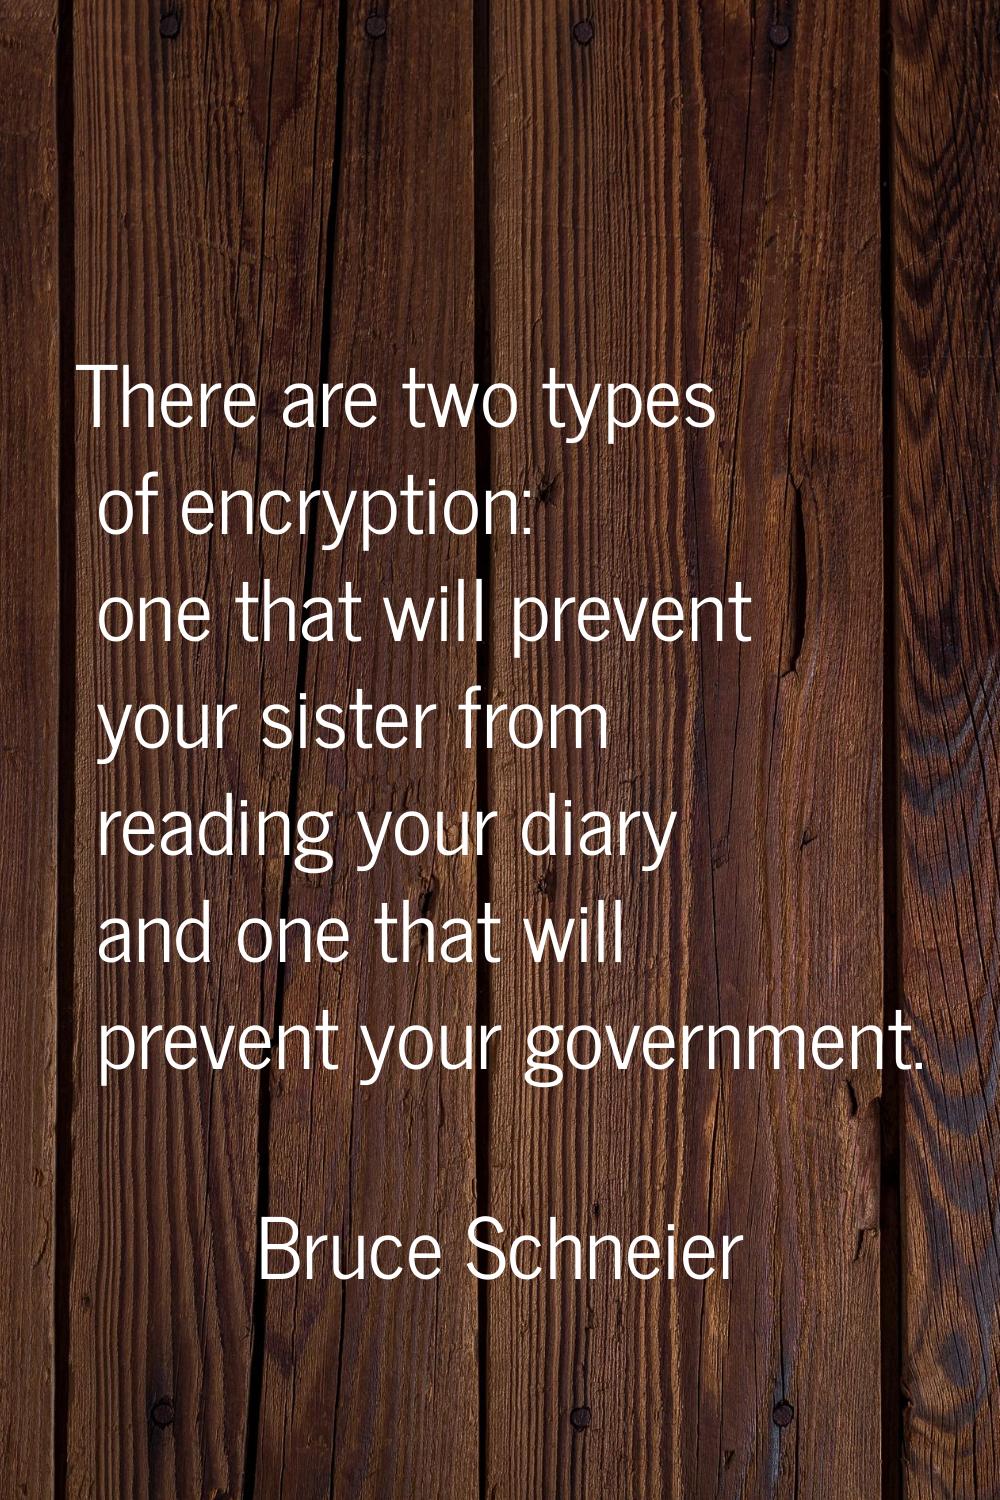 There are two types of encryption: one that will prevent your sister from reading your diary and on